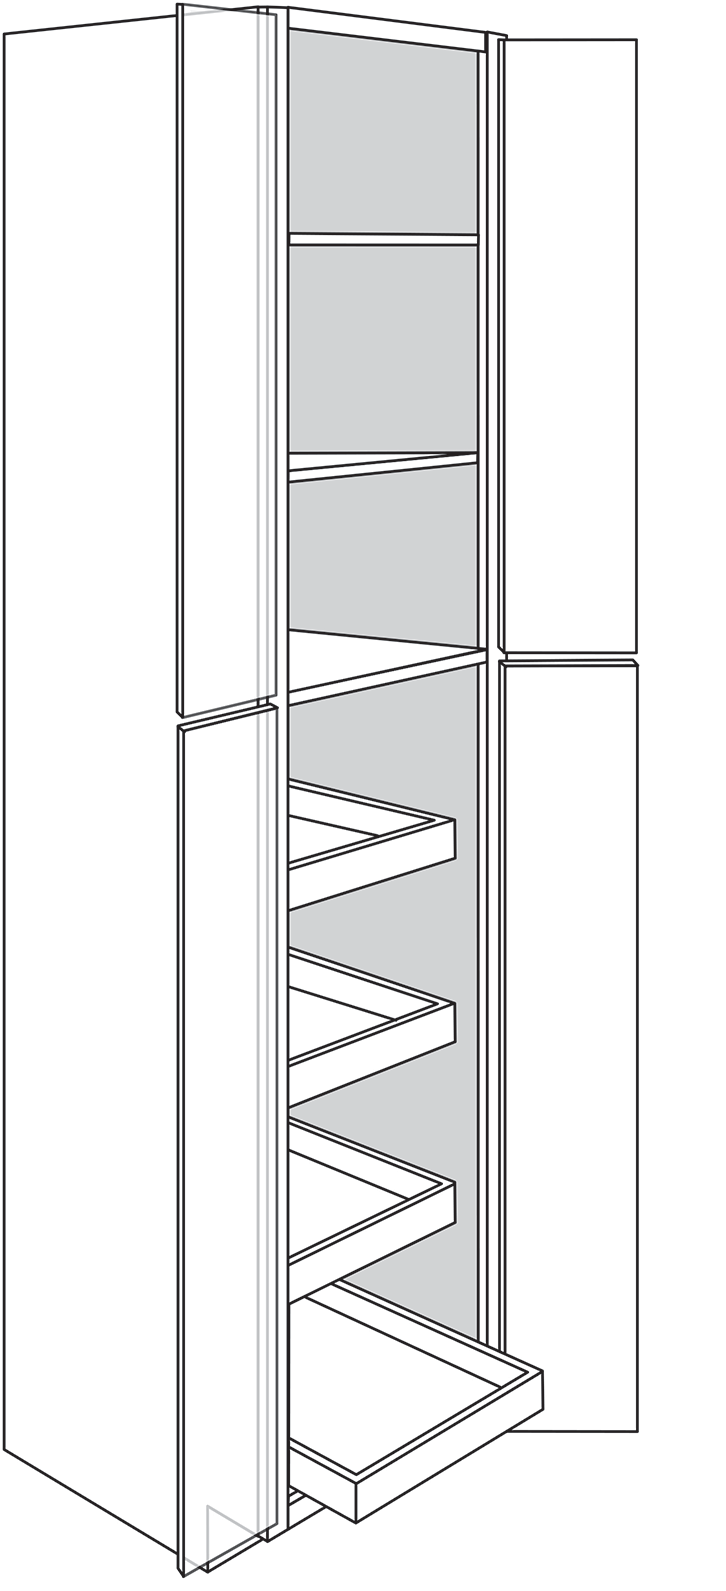 Radnor Slab 4-Door Pantry Cabinet w/ 4 Soft-Close Rollout Trays 24″W x 96″H